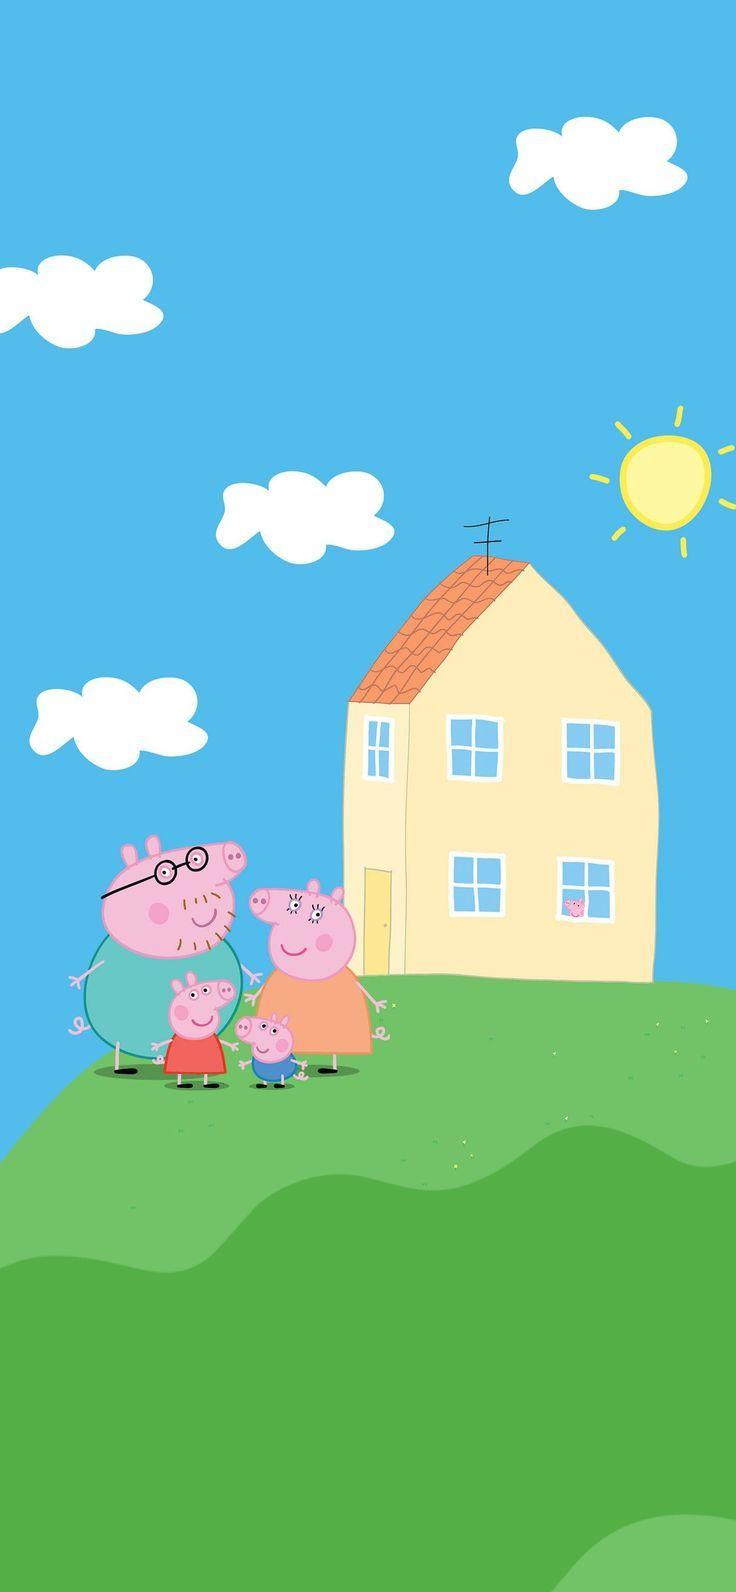 Peppa Pig iPhone Wallpaper For Kids And Adults In